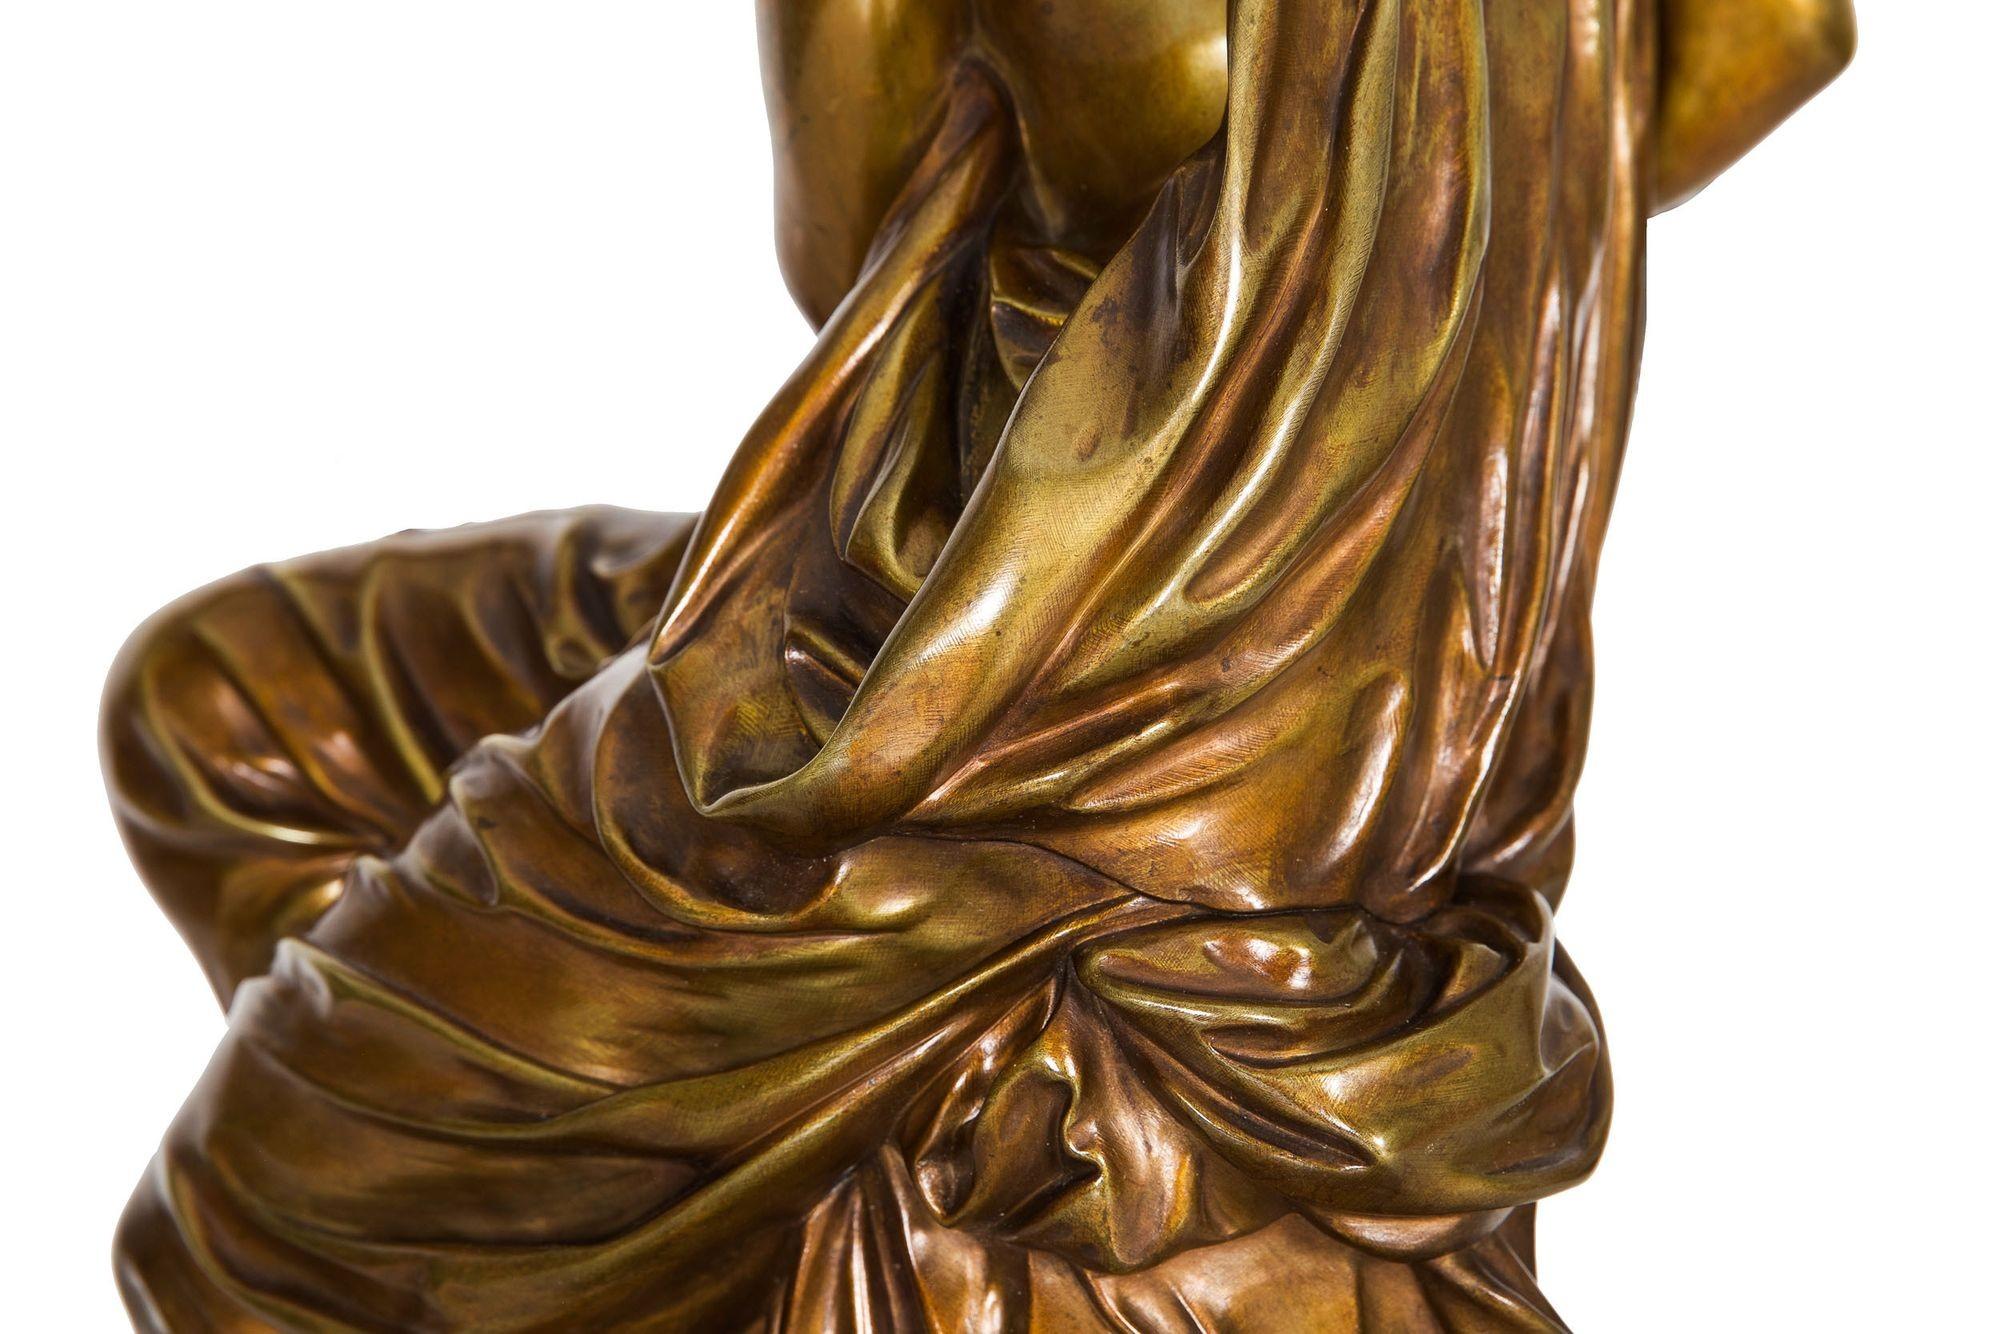 French Antique Bronze Sculpture “Seated Woman” by Etienne-Henri Dumaige, c.1880 For Sale 11